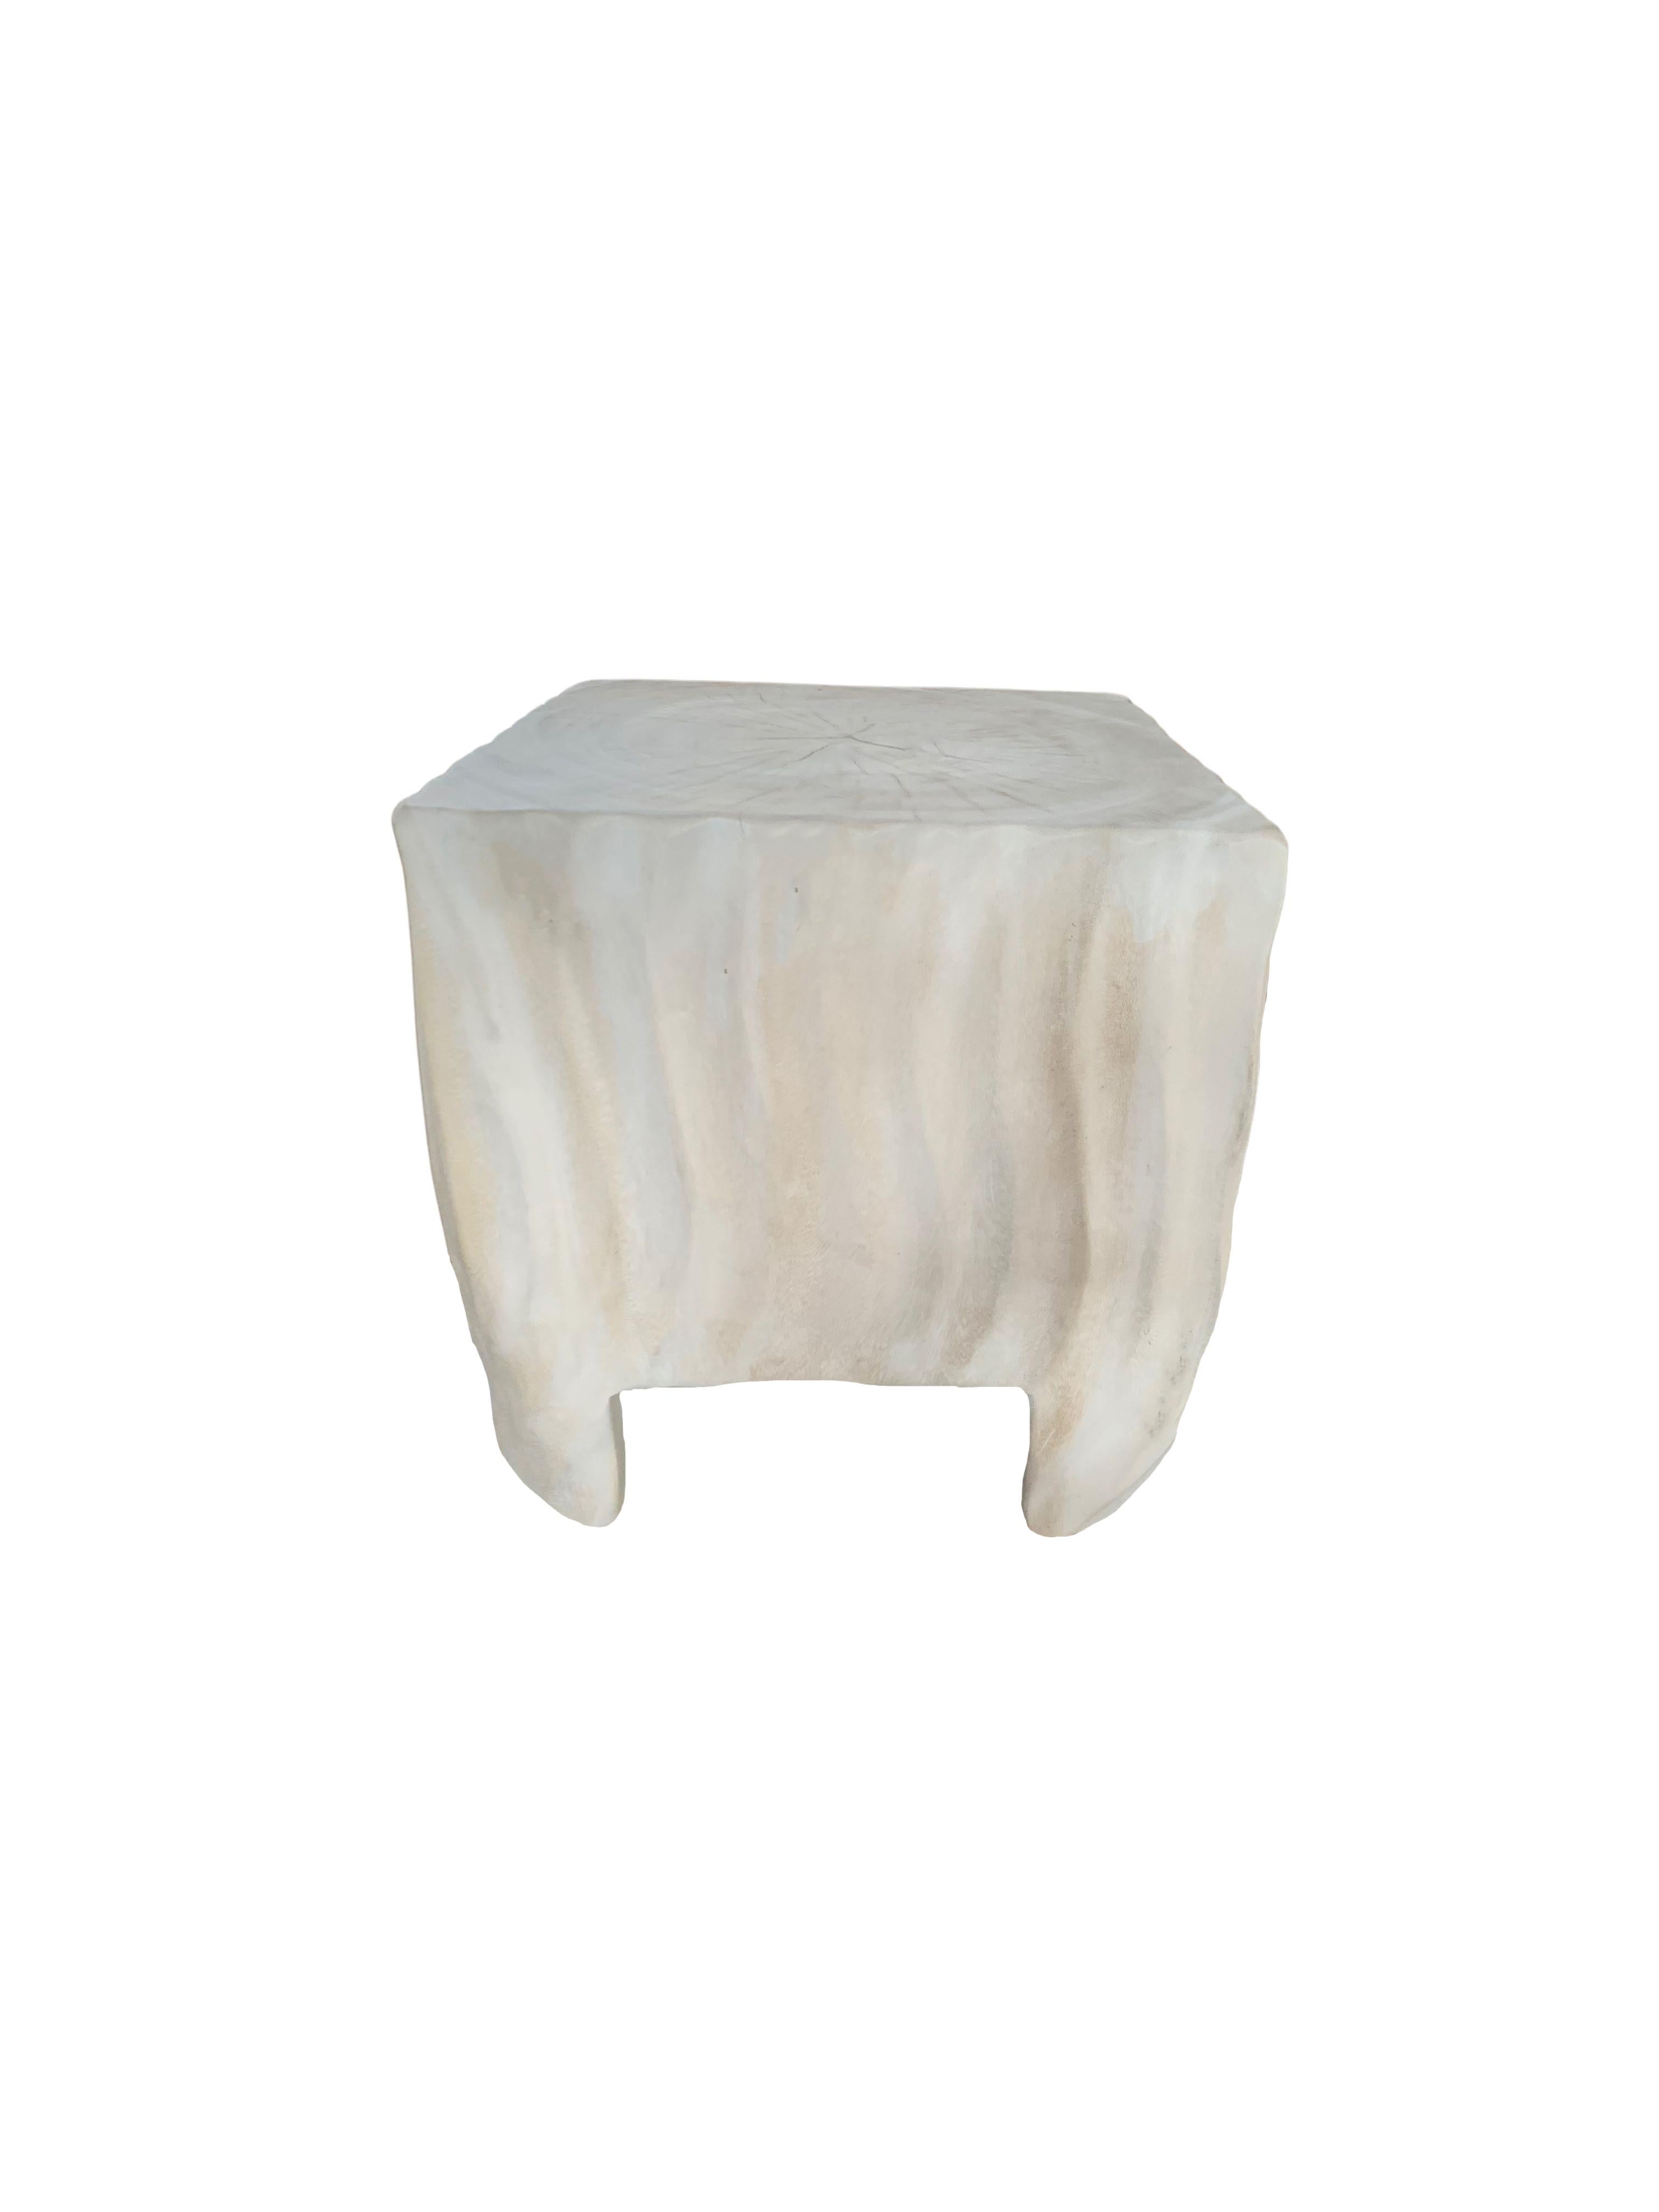 Indonesian Side Table Mango Wood Bleached Finish